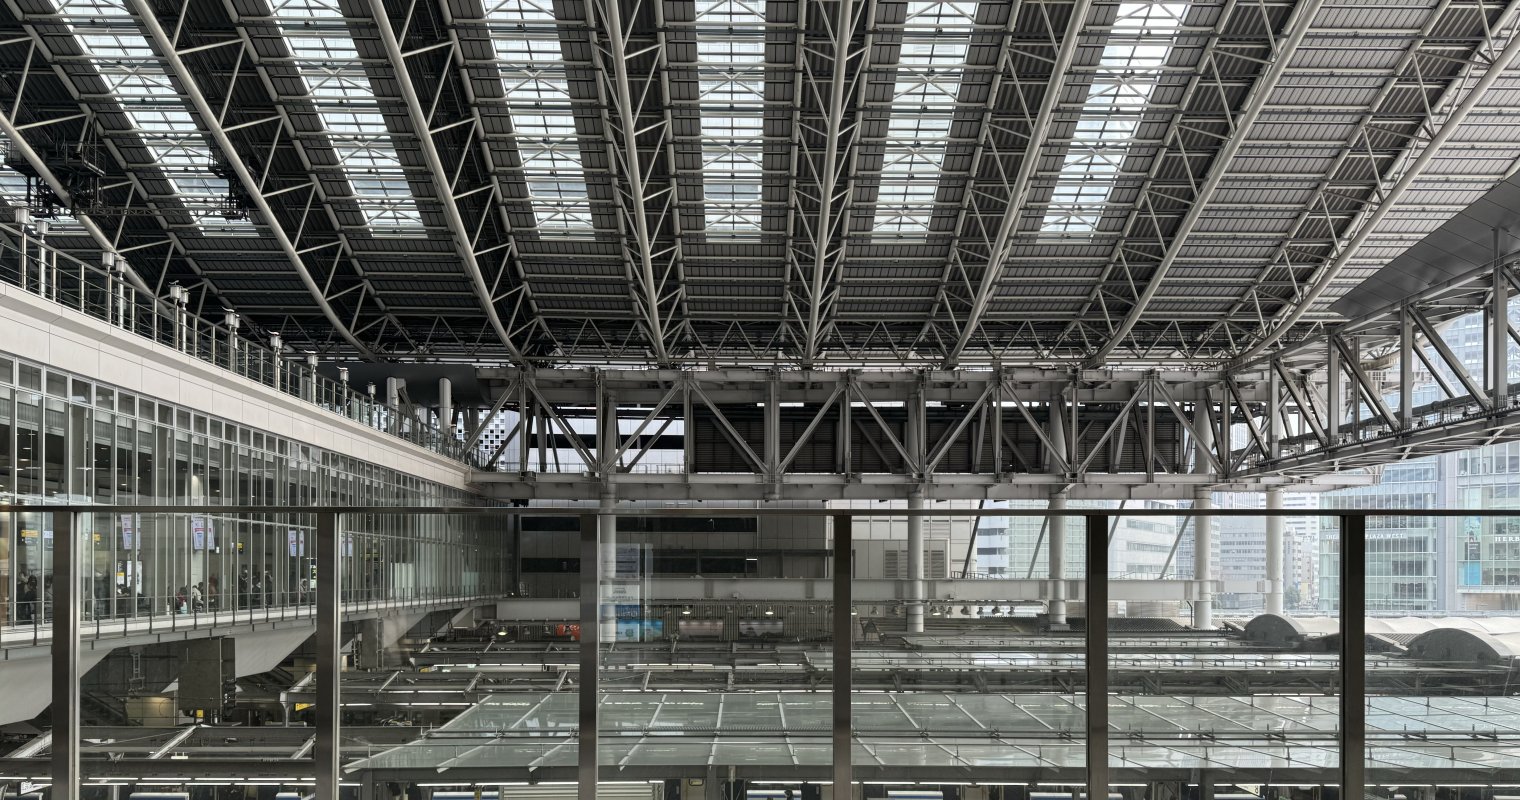 Overlooking the train platforms in Osaka Station